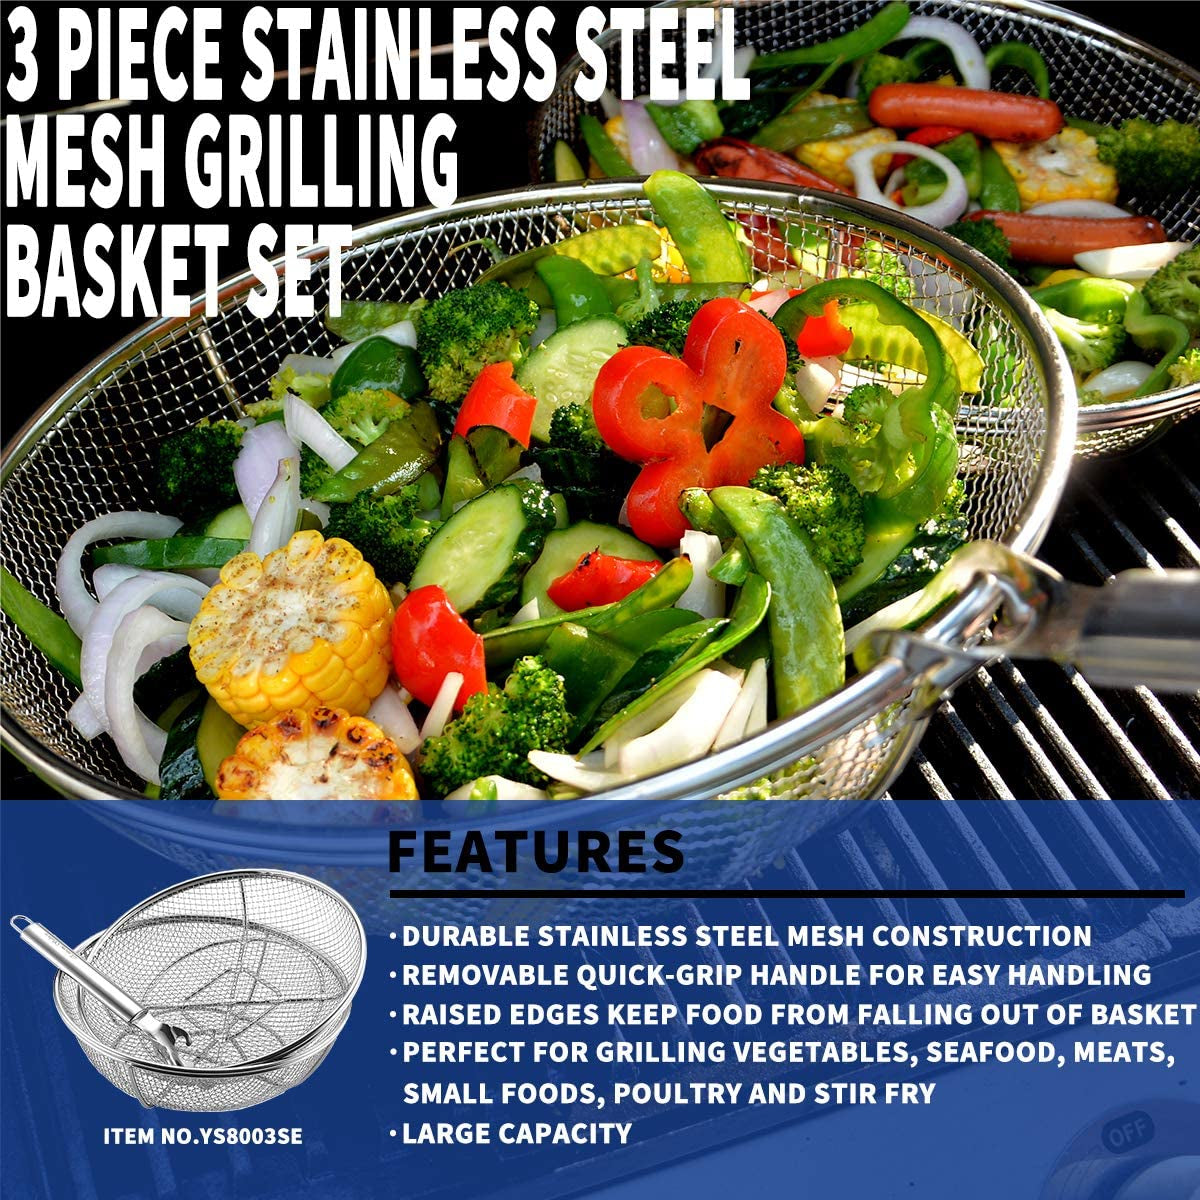 Extreme Salmon, Grill Basket, Grill Accessories Set Heavy Duty Barbecue Grilling Basket Vegetables Stainless Steel Veggies Grill Topper Cookware with Handles Charcoal Gas Outdoor Grill Cooking